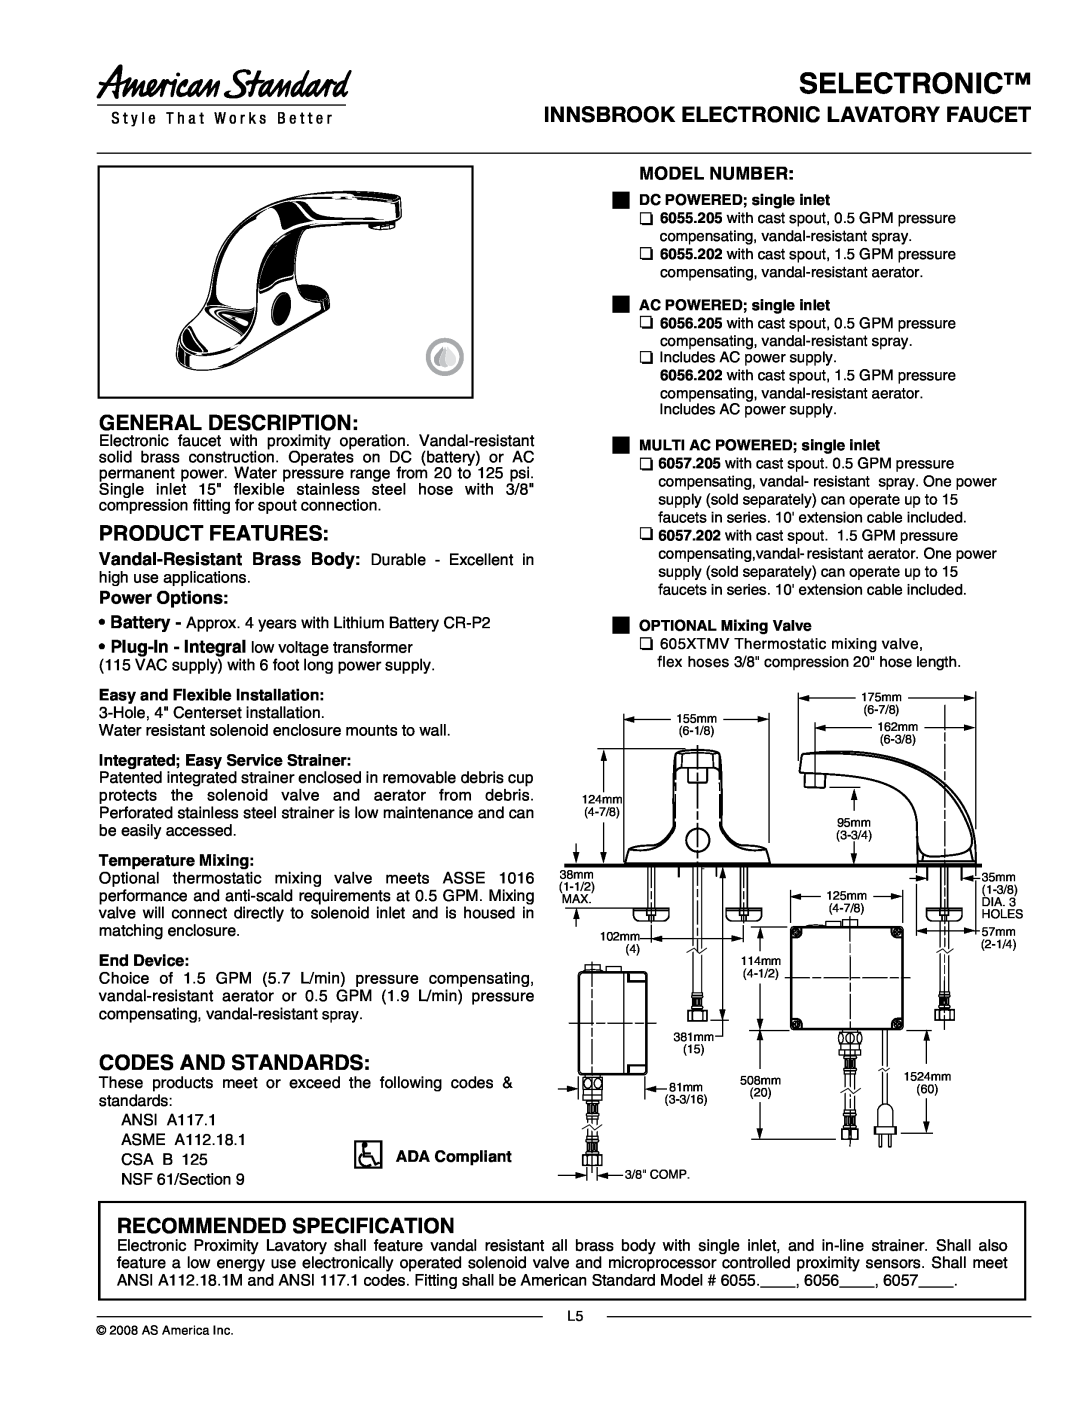 American Standard 605XTMV manual Selectronic, Innsbrook Electronic Lavatory Faucet, General Description, Product Features 